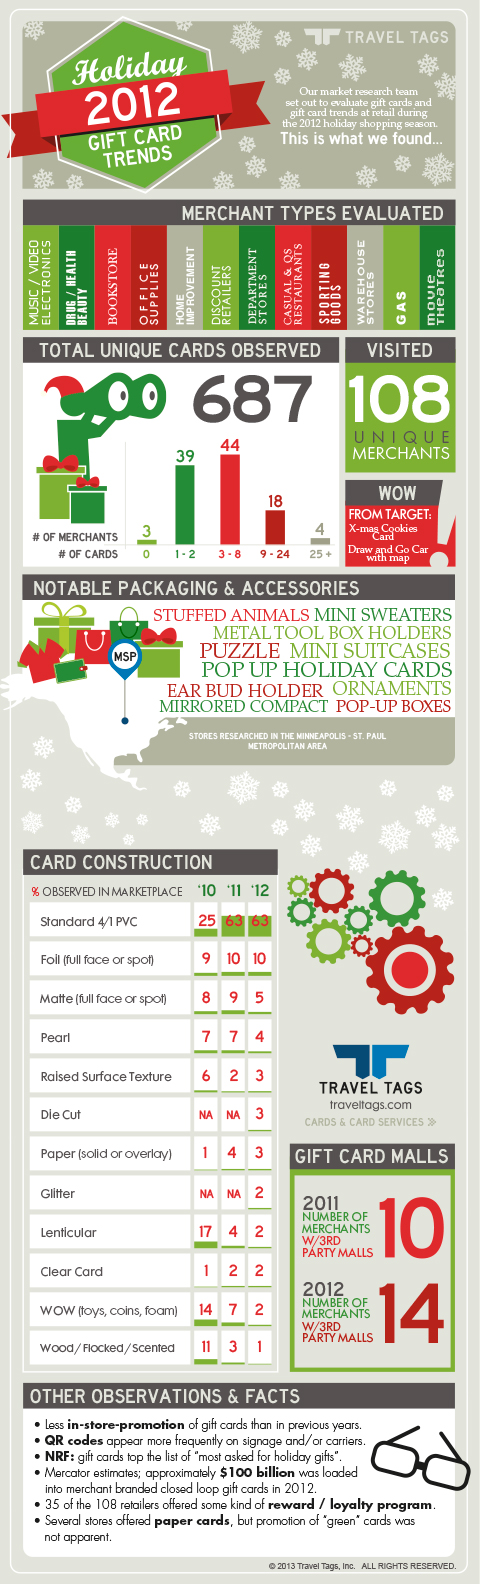 Gift Card Trends Holiday 2012